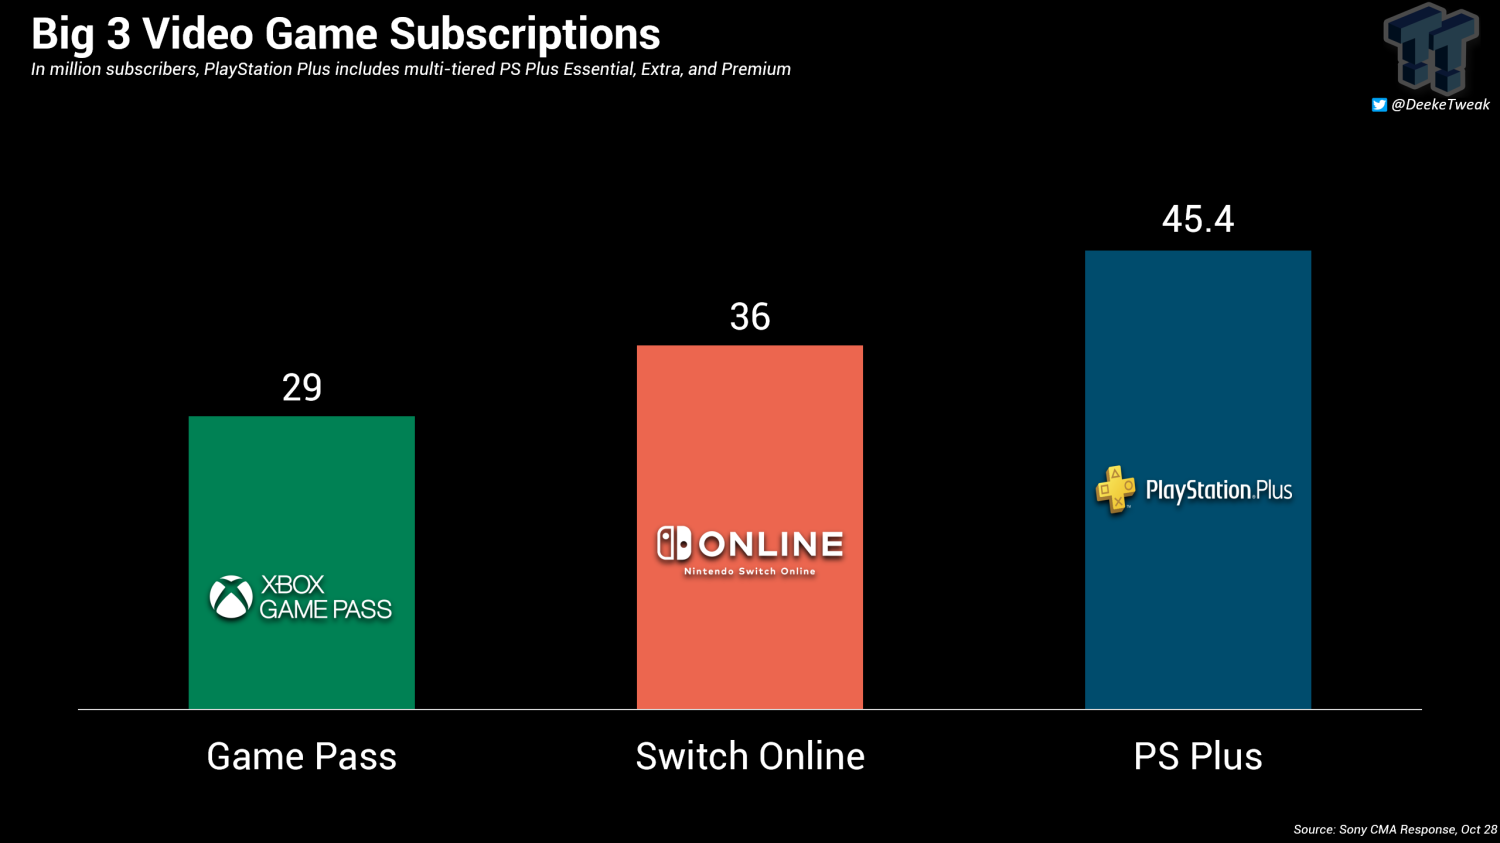 Xbox Game Pass vs. PlayStation Plus: Which game subscription service is  better?